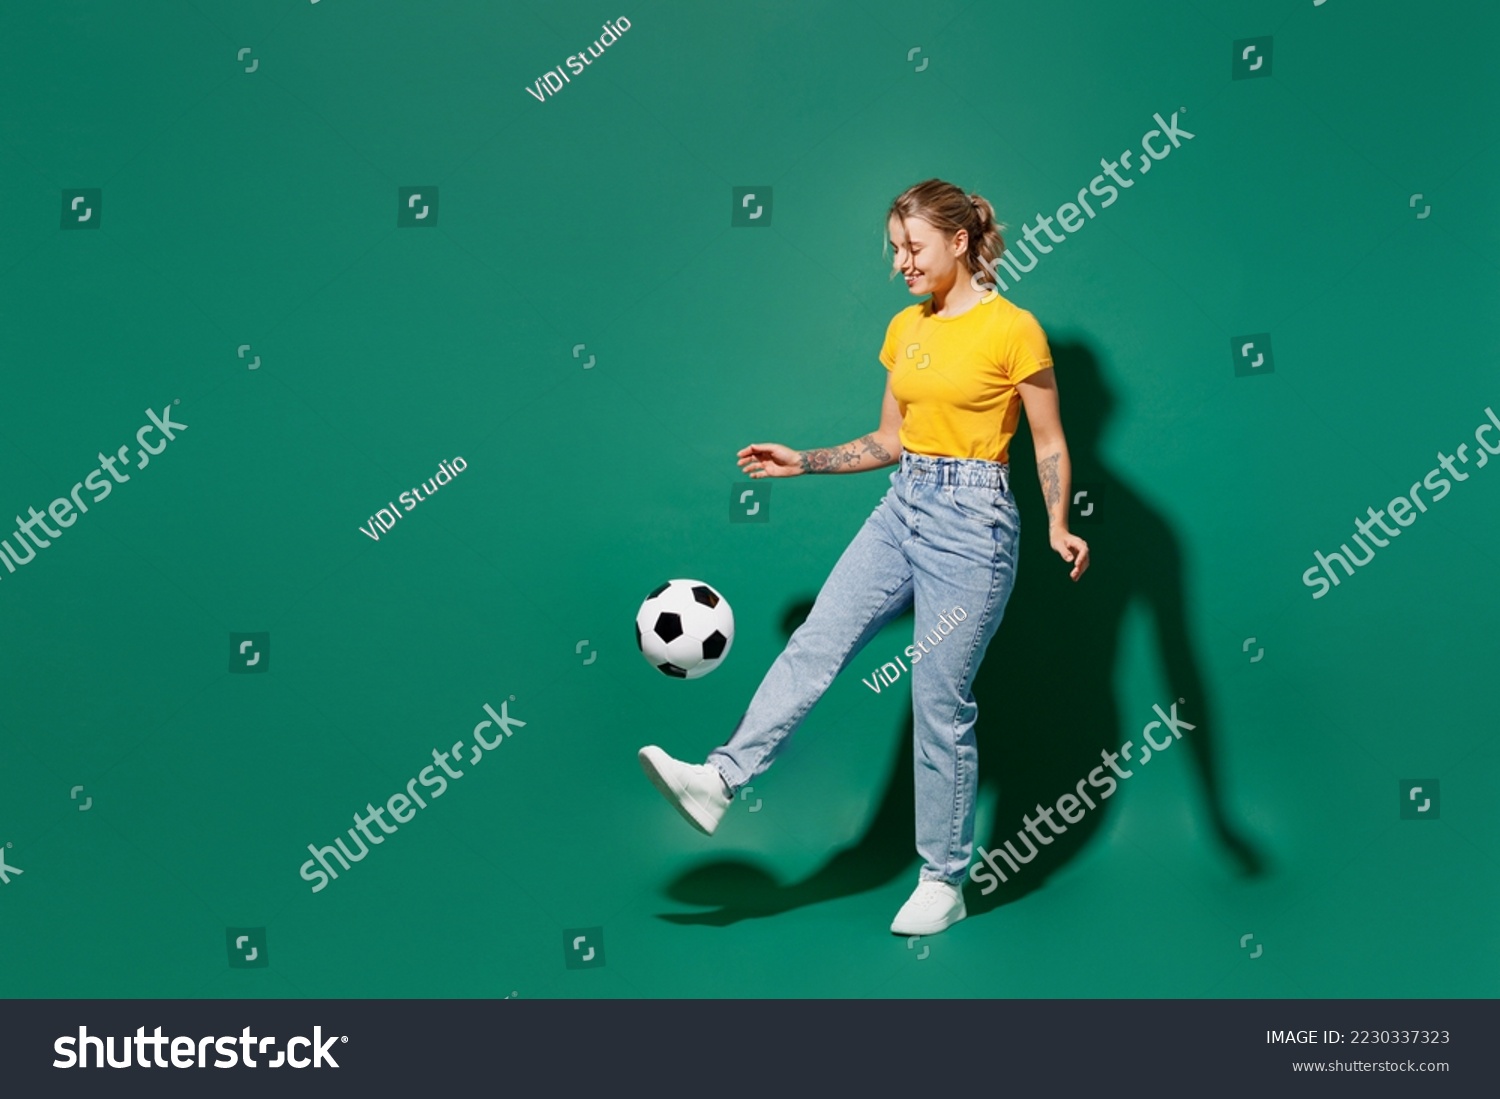 Full body side view fun active young woman fan wear basic yellow t-shirt cheer up support football sport team kick soccer ball on foot leg watch tv live stream isolated on dark green background studio #2230337323